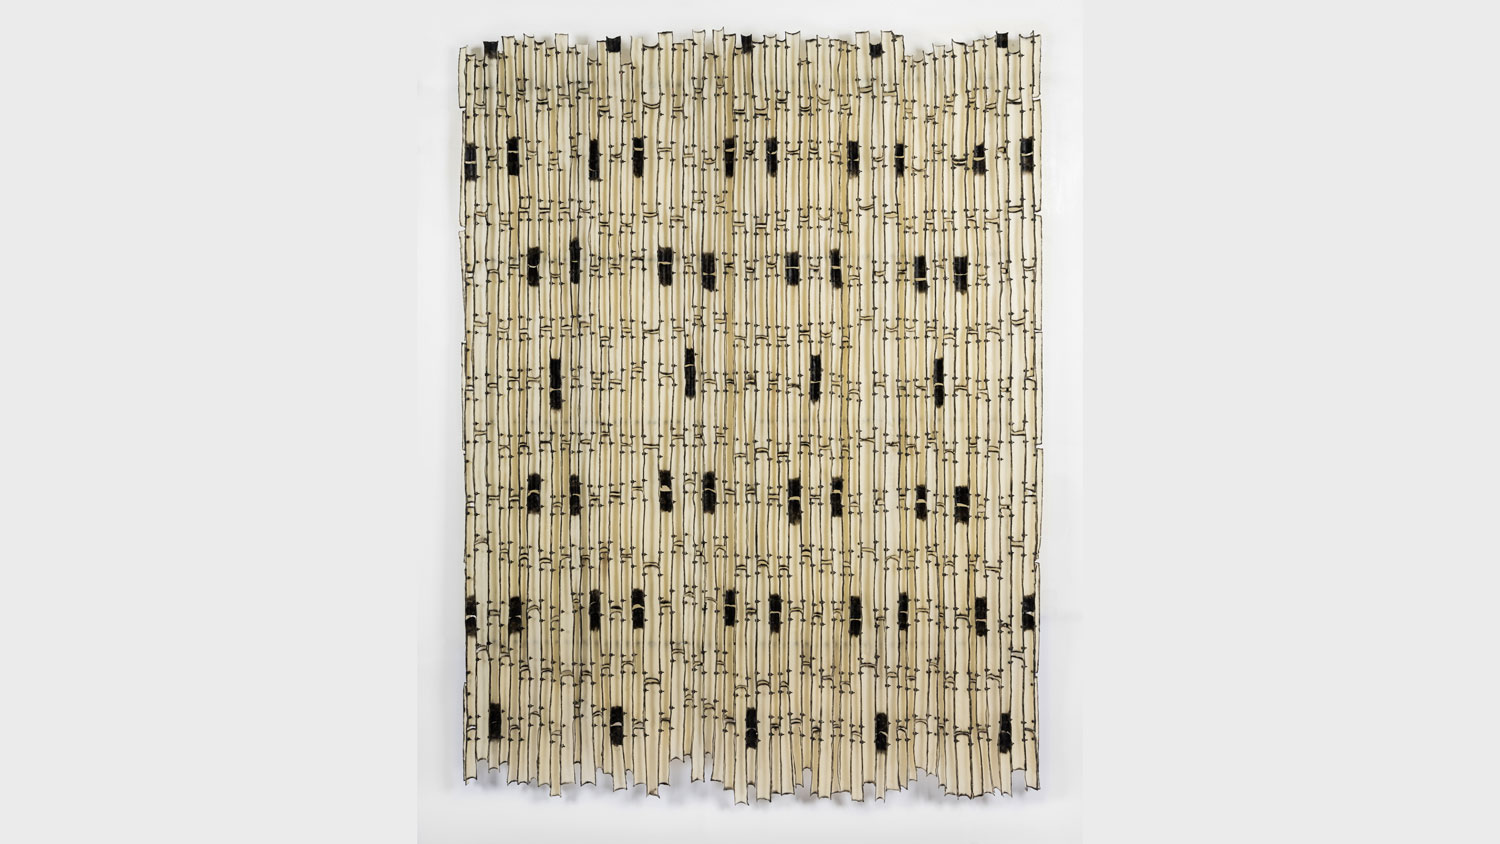 A birch tapestry of repeating patterns resembling bamboo hanging on a black white wall.  